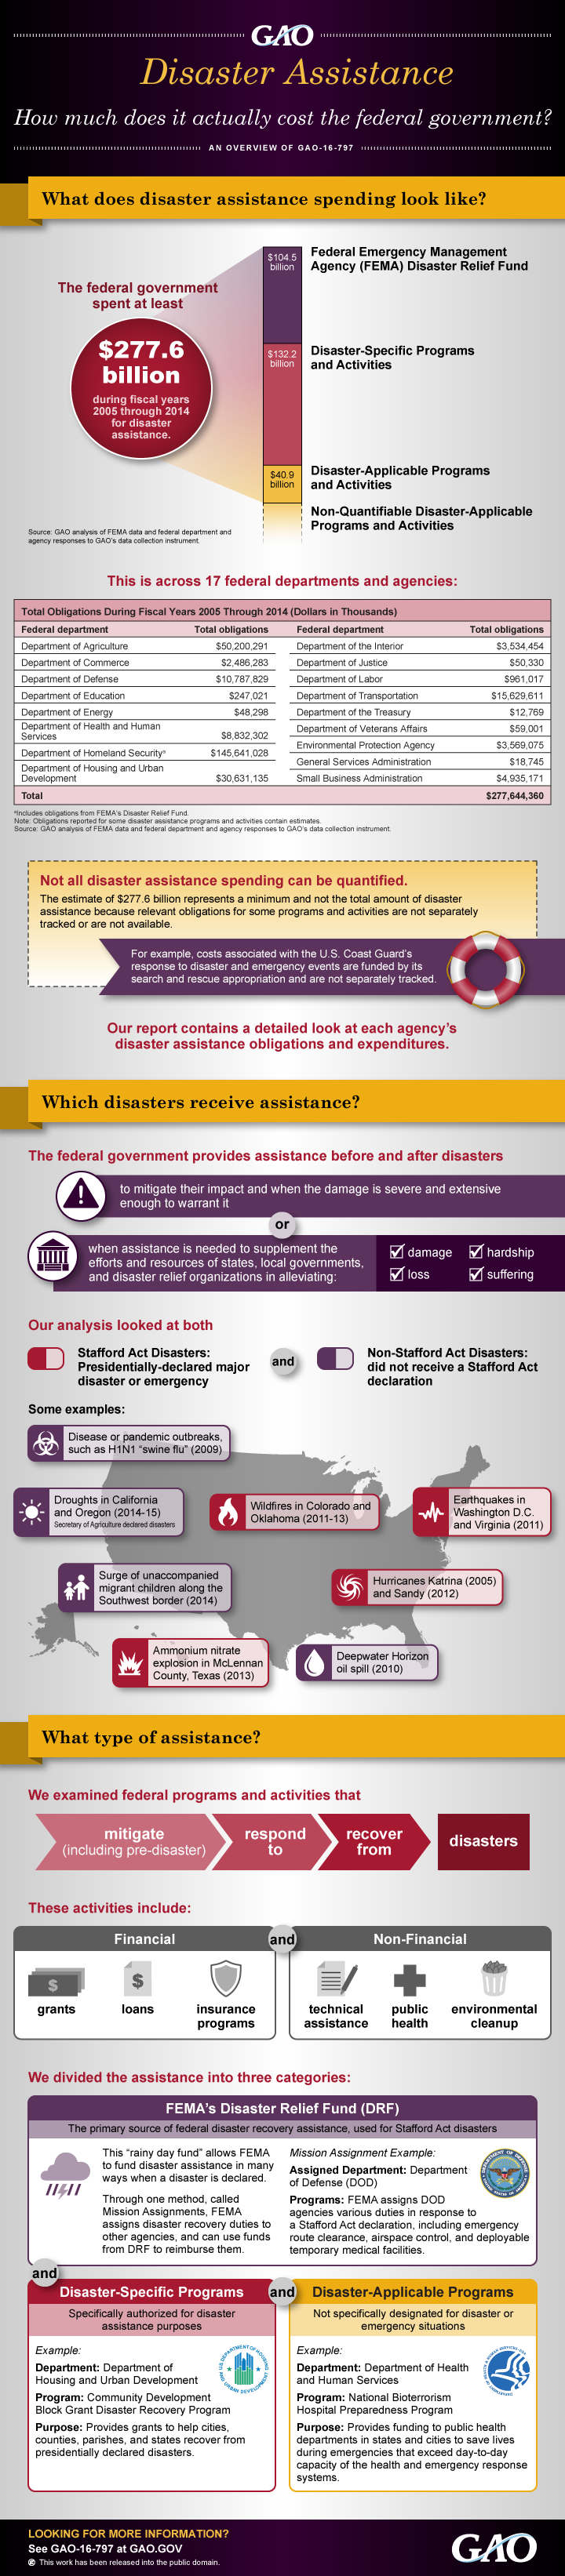 gao-16-797_disaster-assistance-infographic